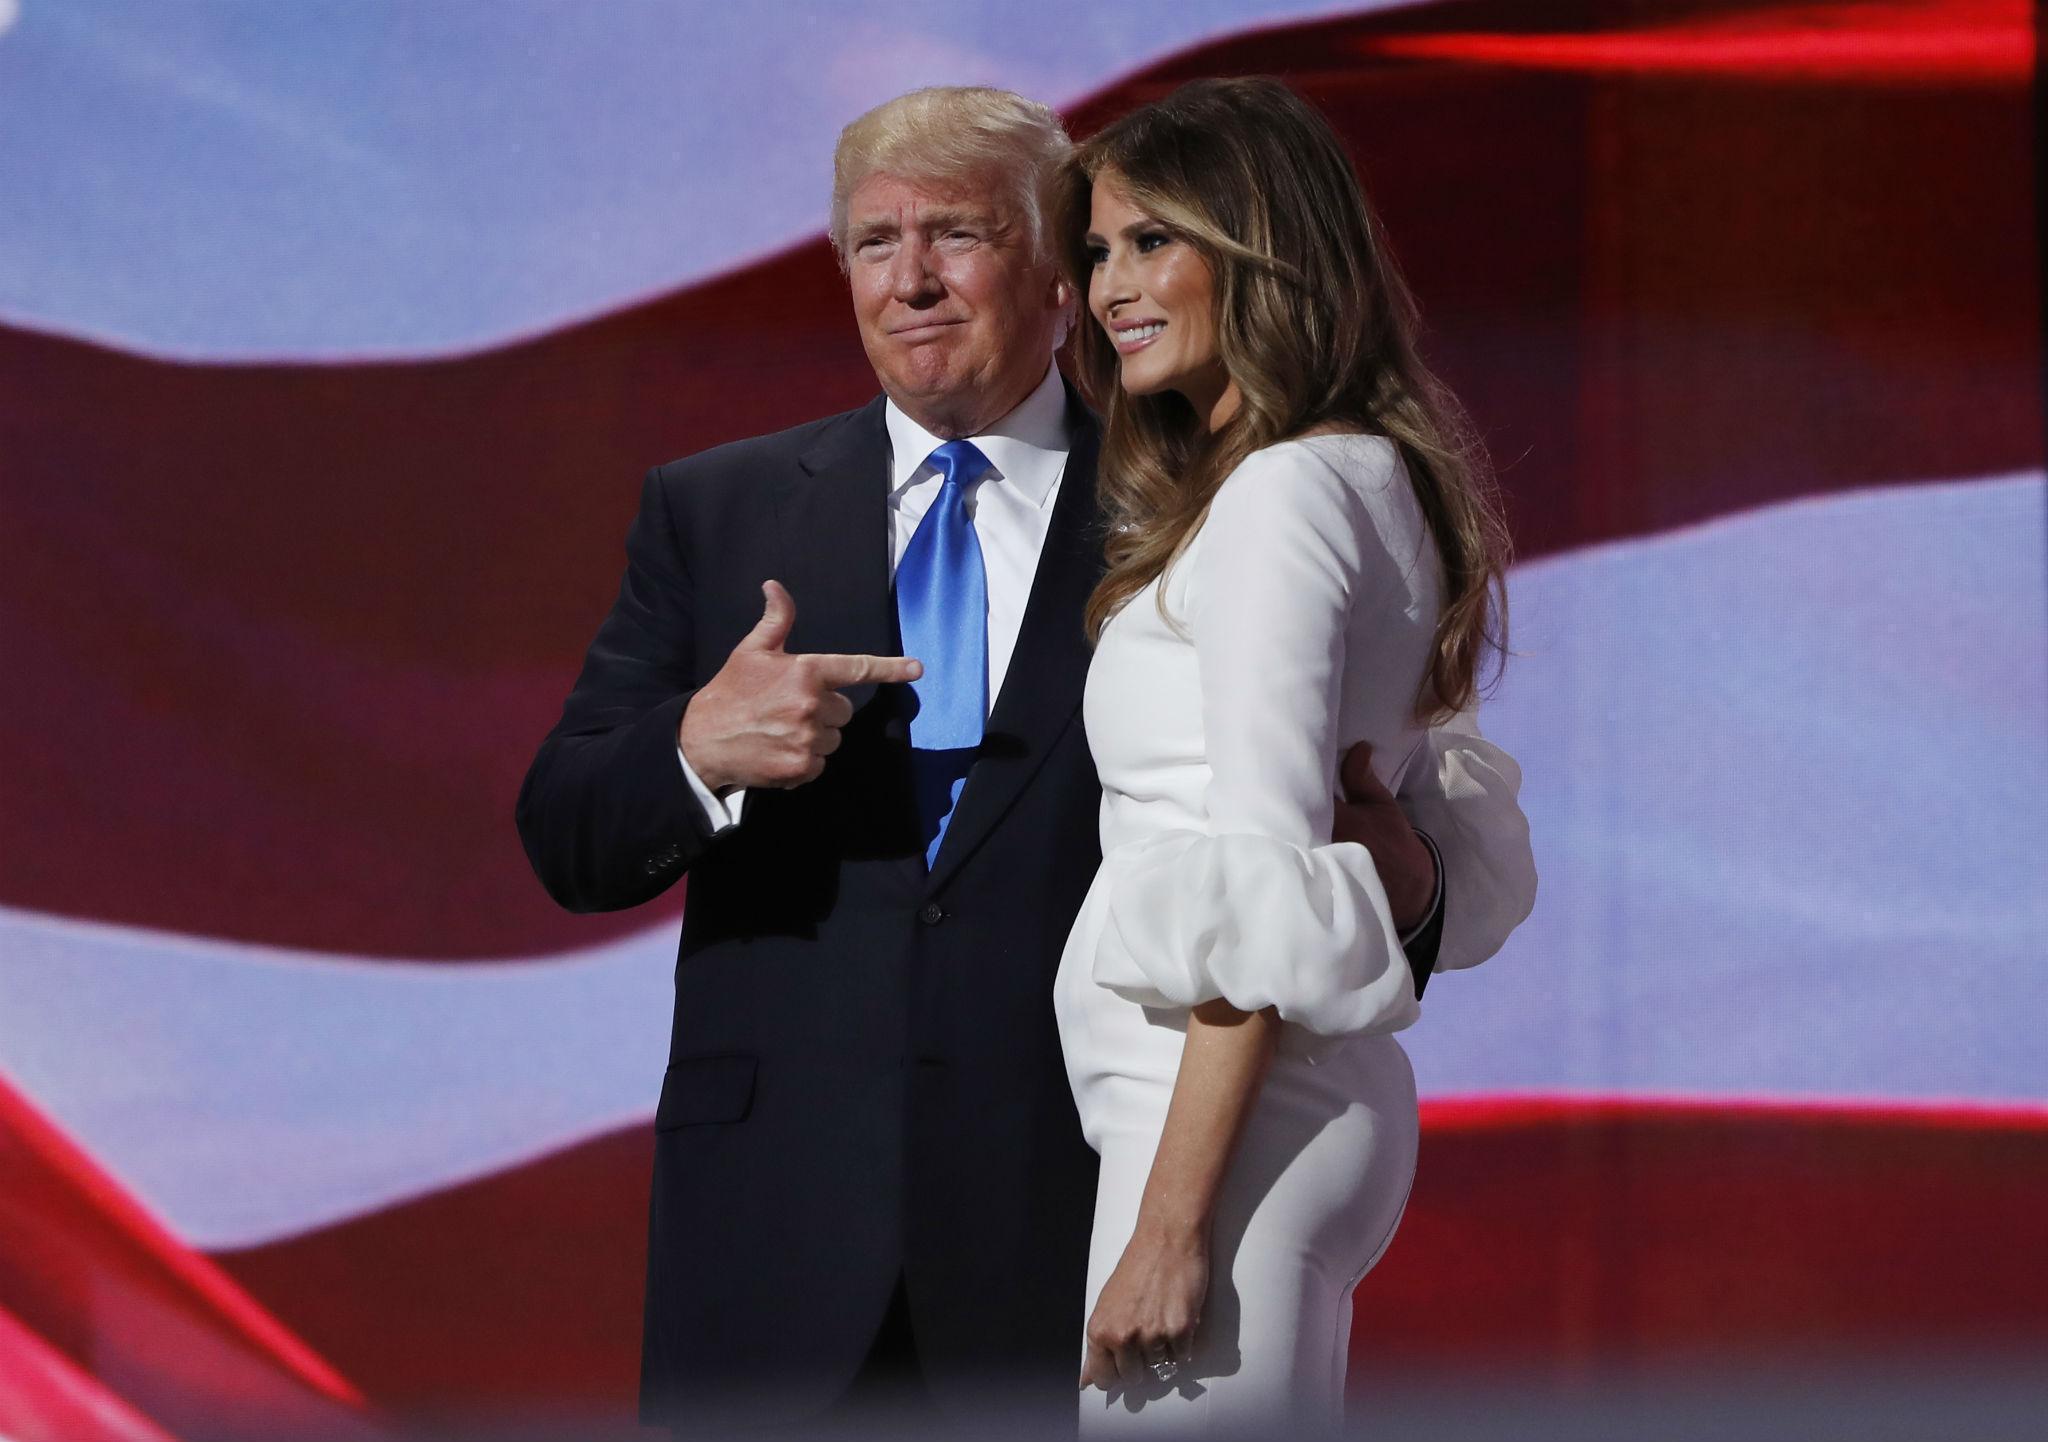 'There is a great deal of love in the Trump family,' Mrs Trump said in her 20-minute primetime speech